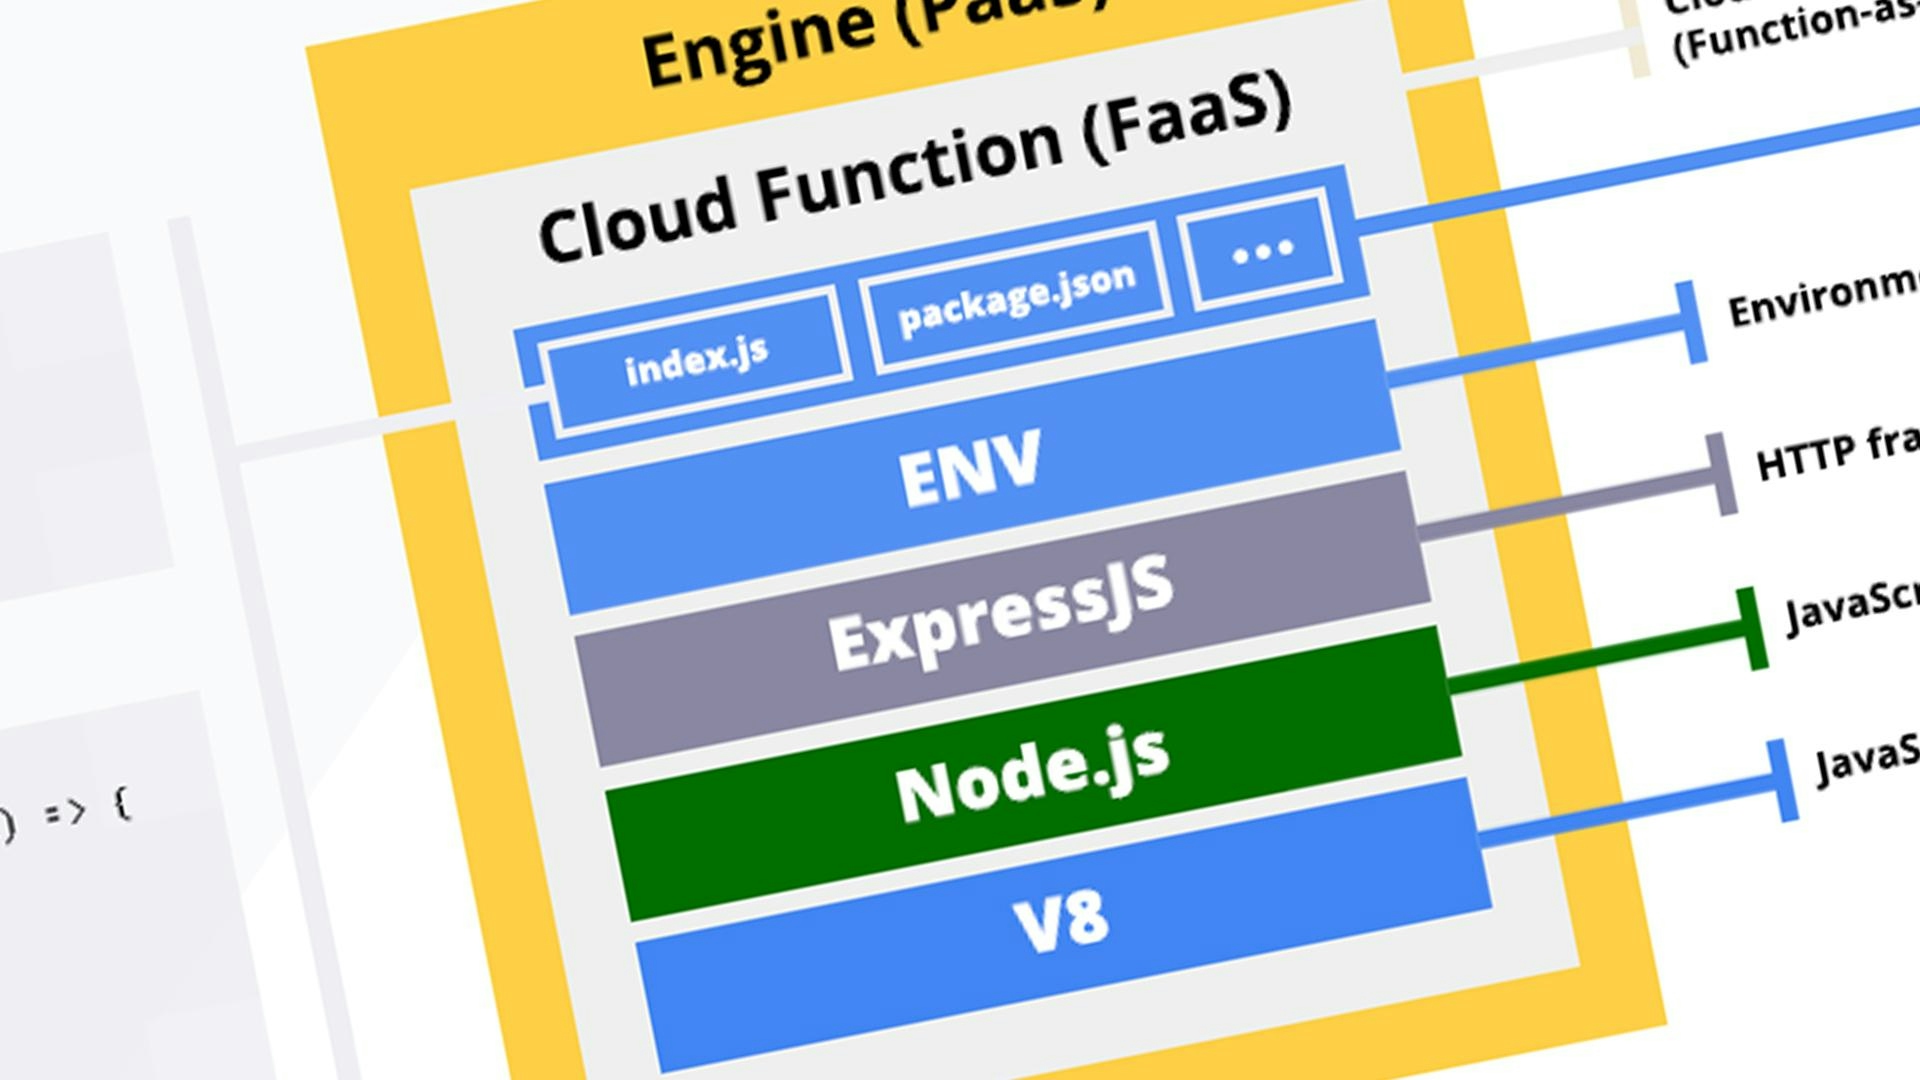 Cover Image for Anatomy of a Google Cloud function [Infographic]